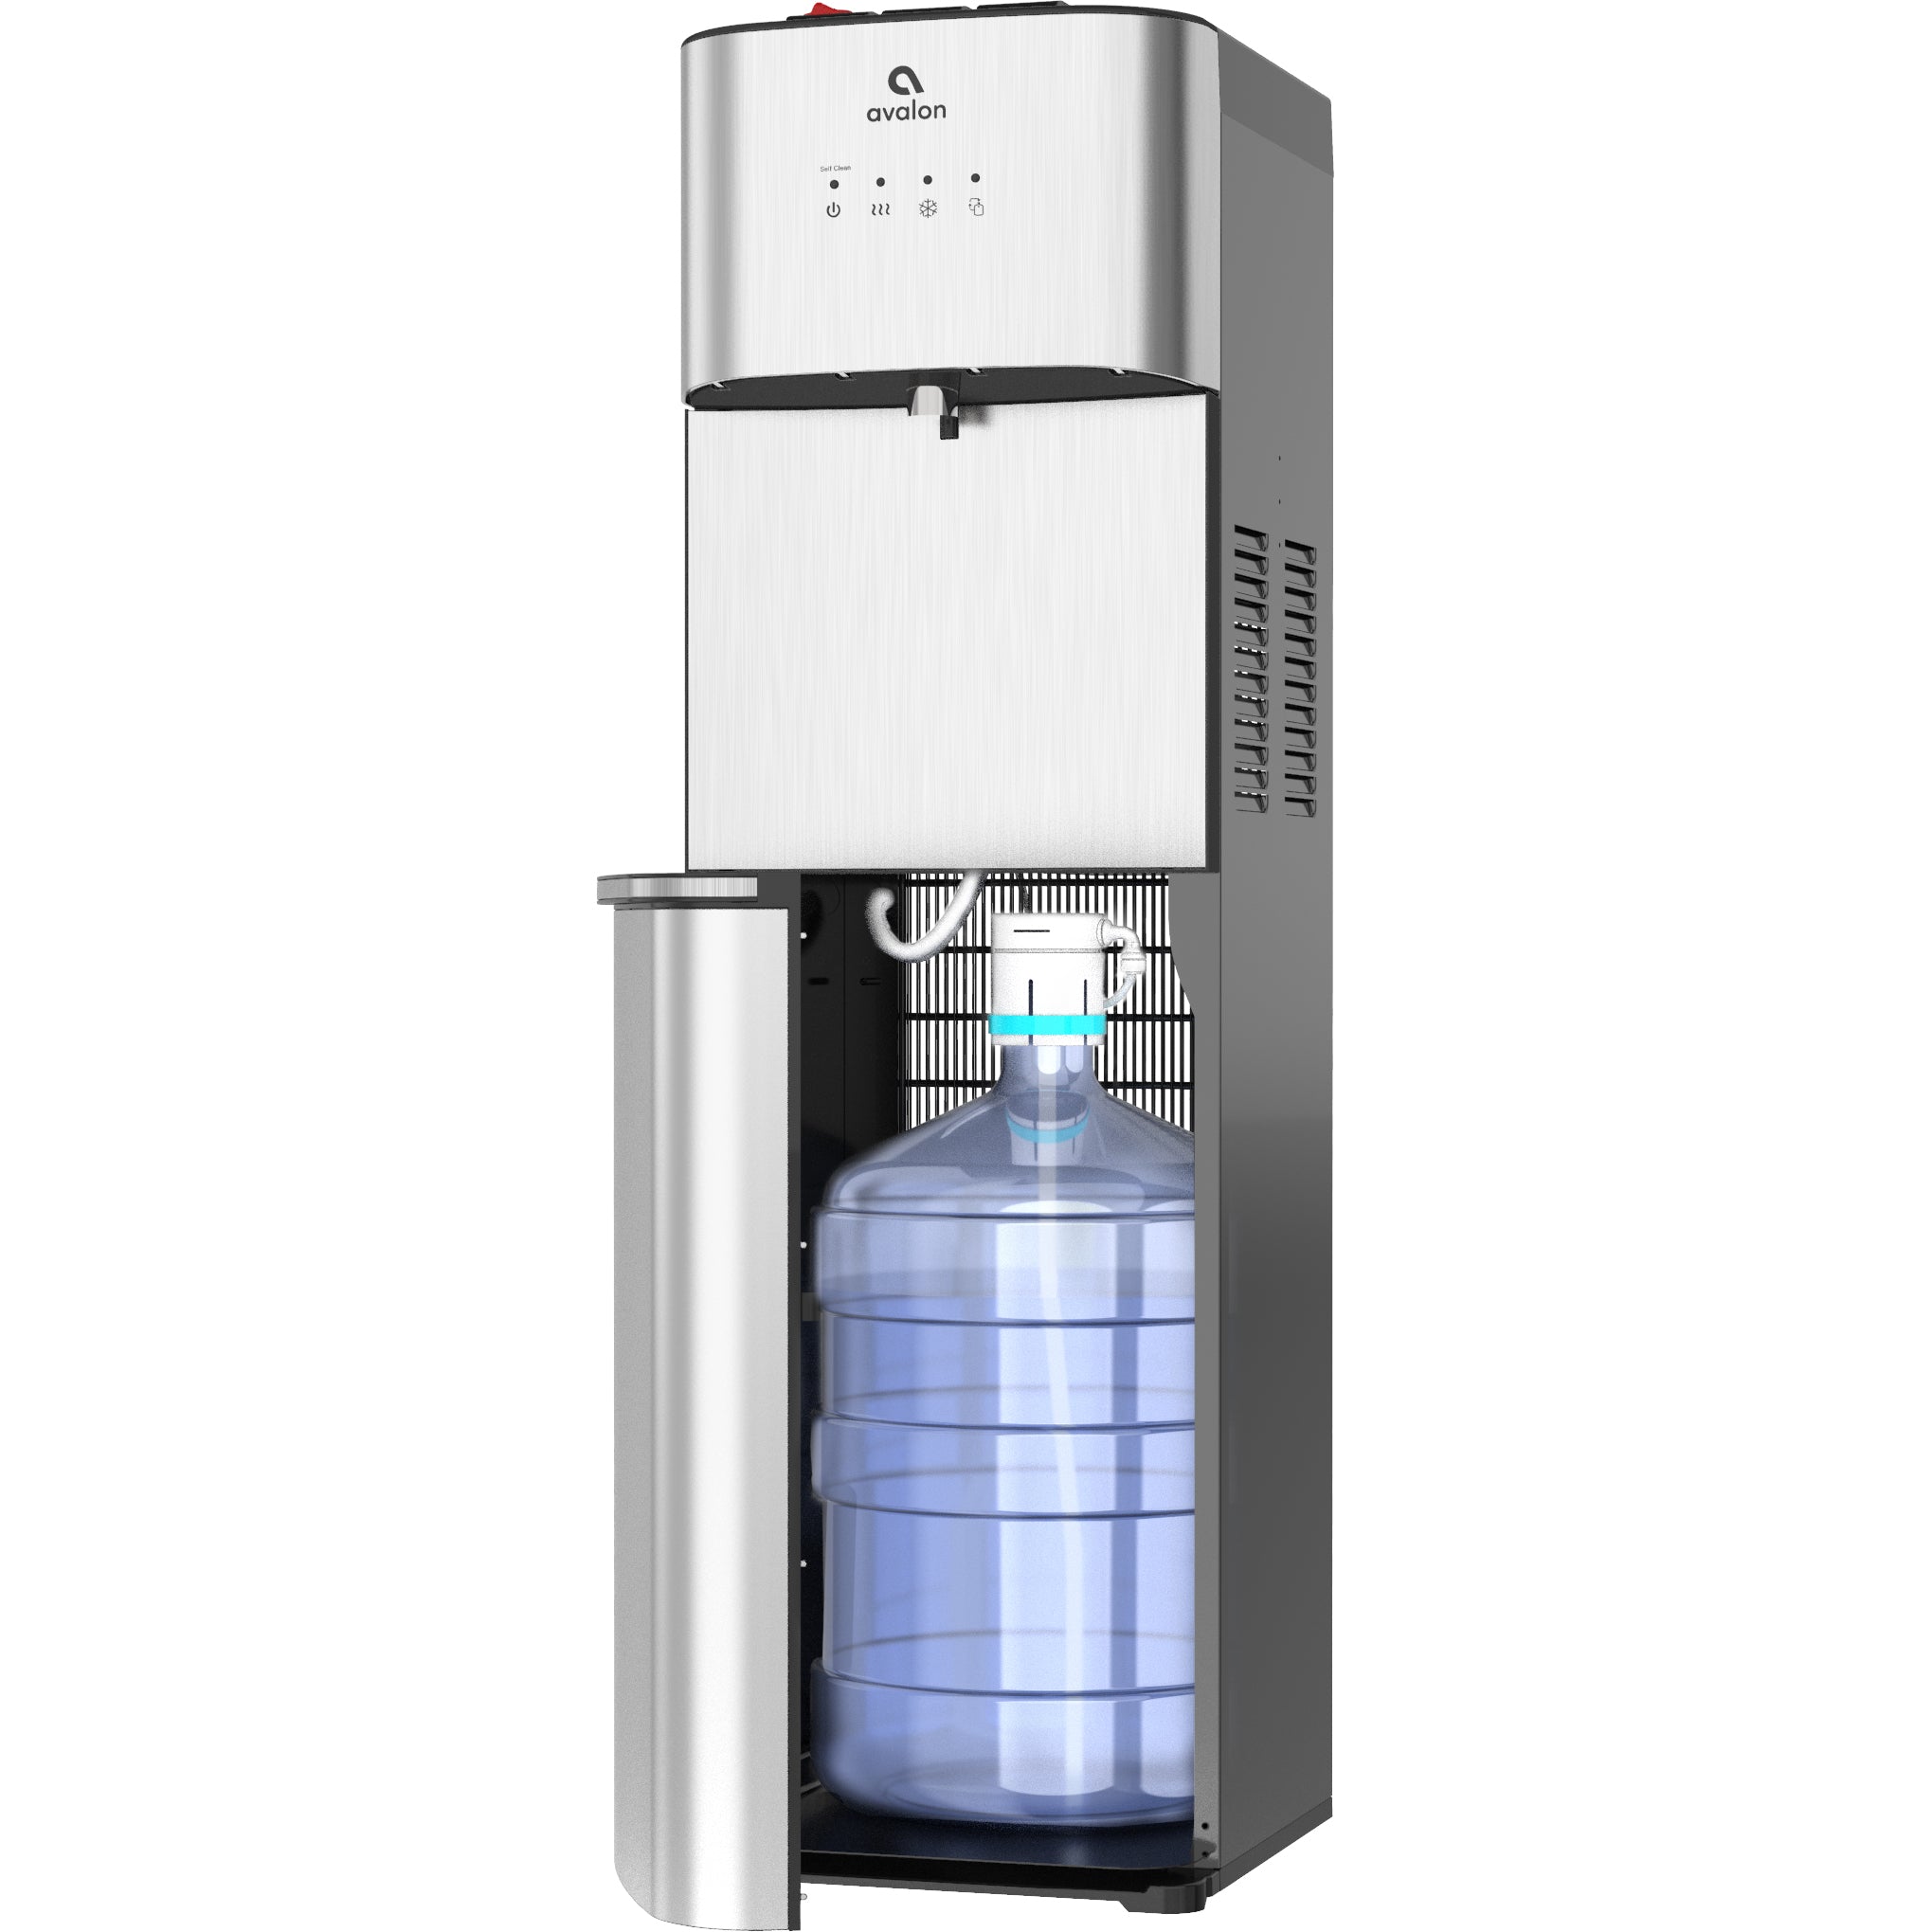 WATER DISPENSER, PRODUCT